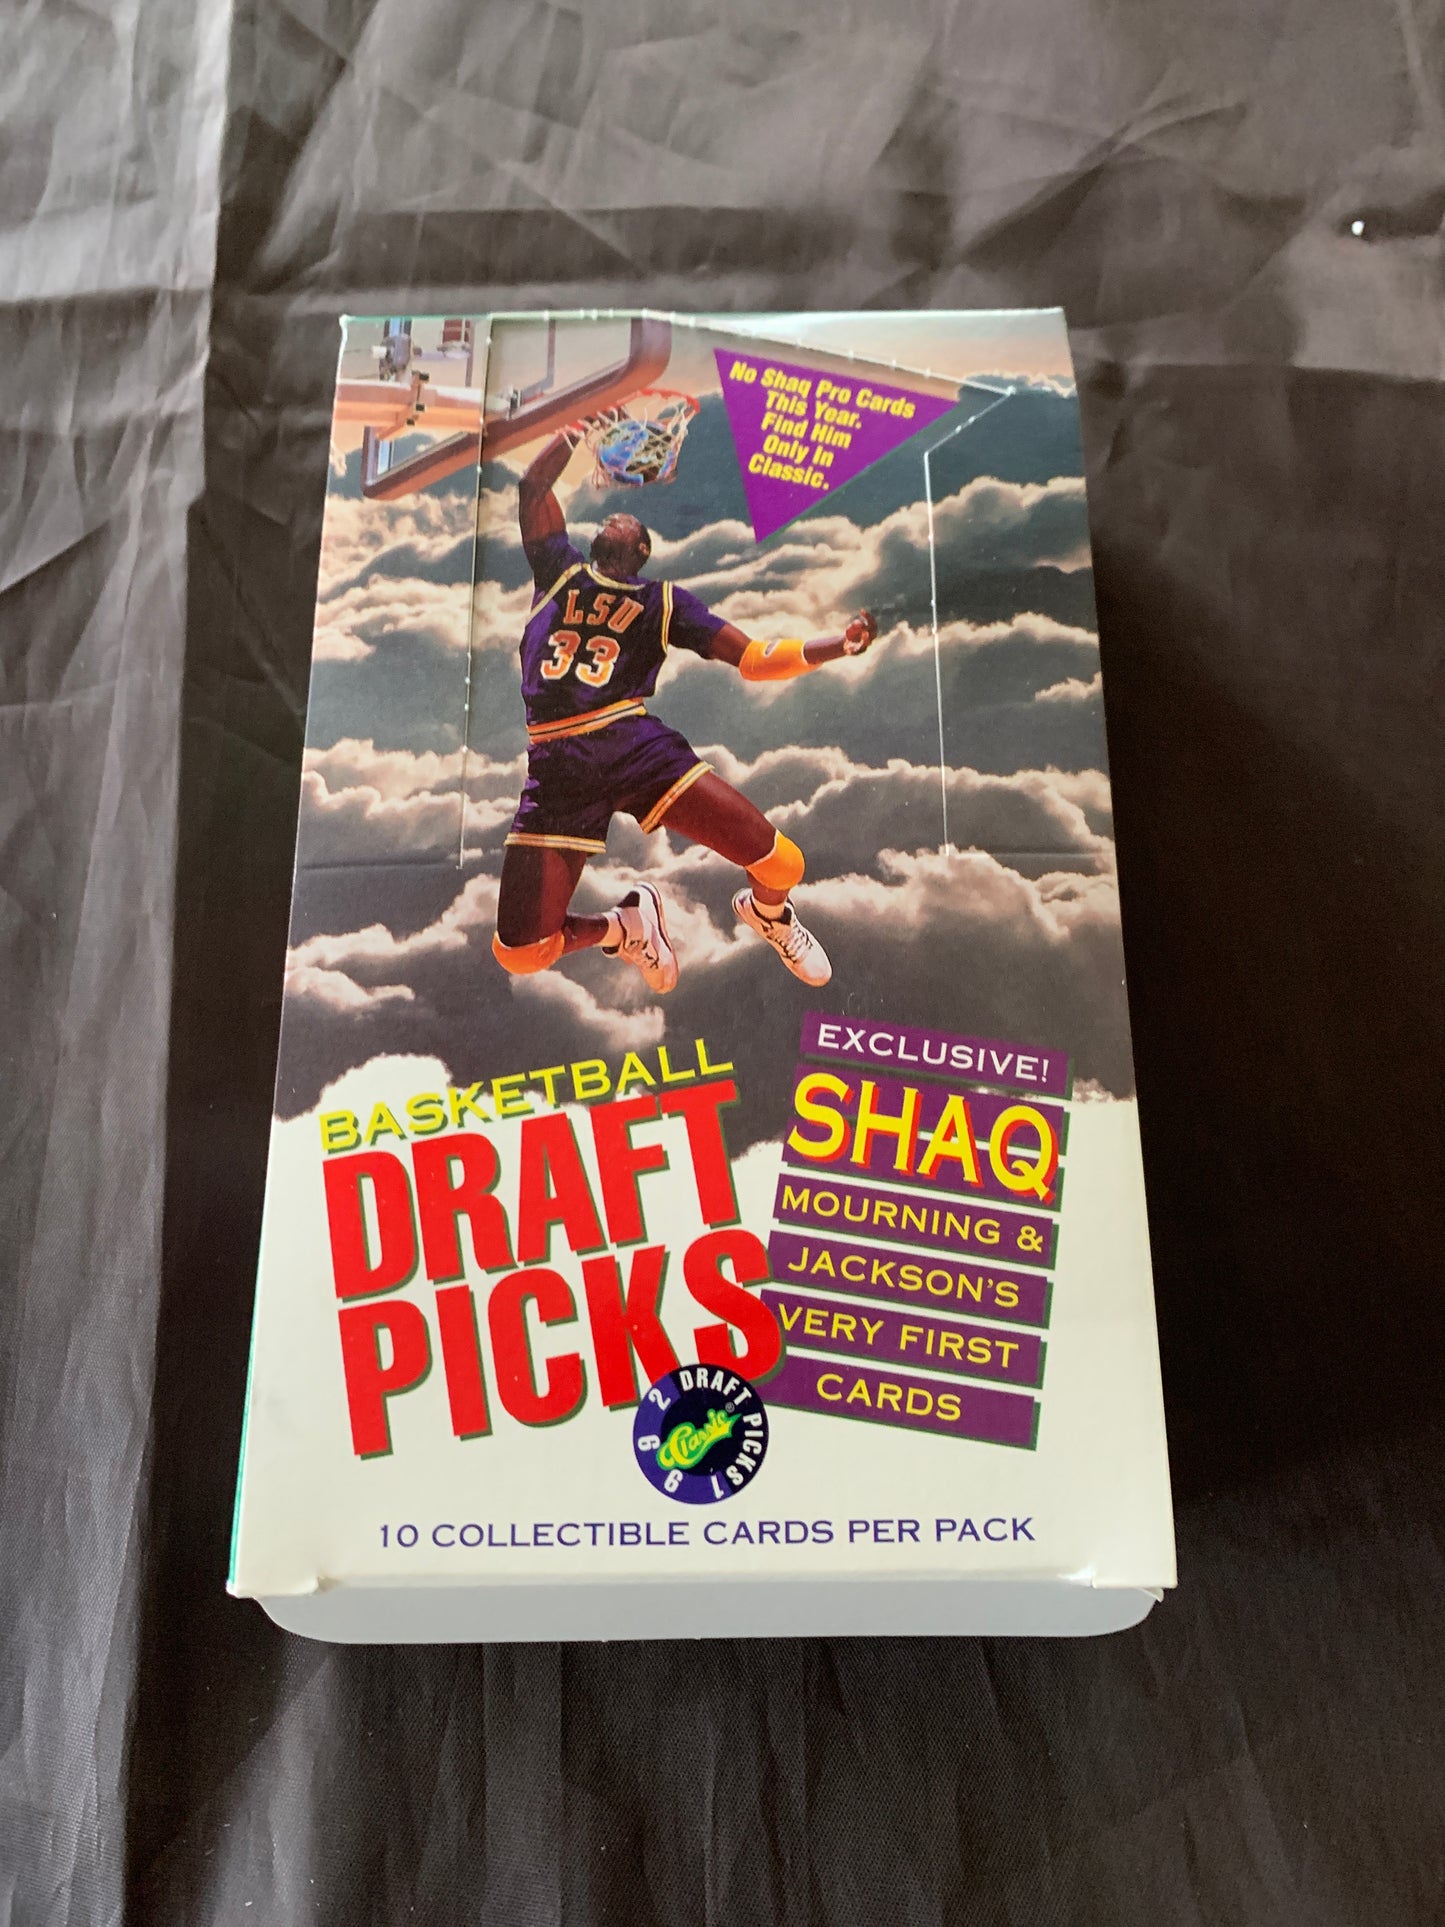 1992 Classic Basketball Draft Picks 10 Cards Pack Sealed Single Pack For Sale. Shaq RC